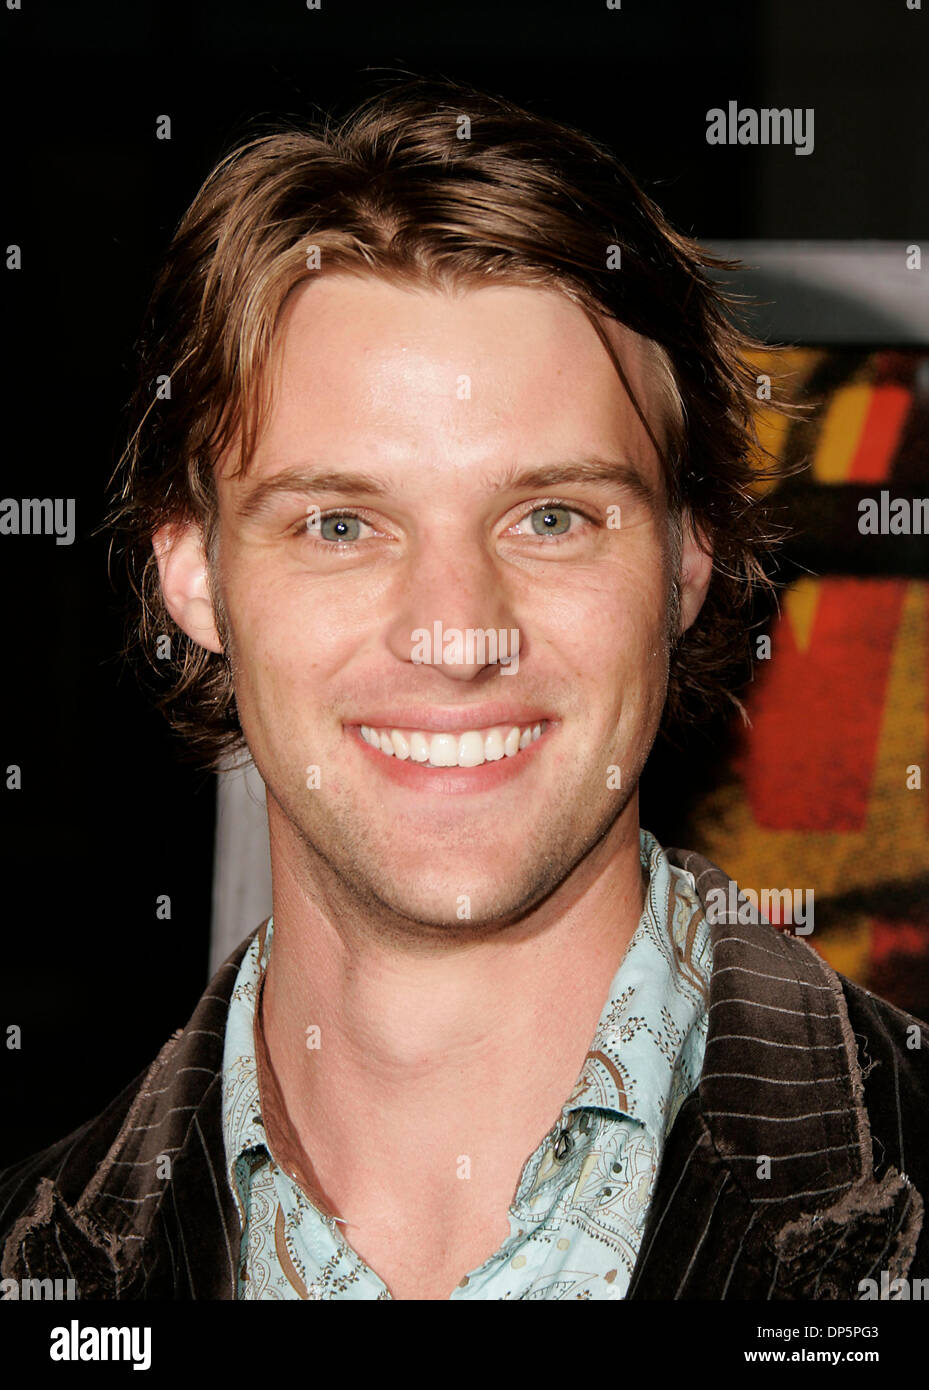 Sep 21, 2006; Beverly Hills, California, USA; Actor JESSE SPENCER at 'The Last King Of Scotland' Los Angeles Premiere held at the Academy of Motions Pictures Theatre. Mandatory Credit: Photo by Lisa O'Connor/ZUMA Press. (©) Copyright 2006 by Lisa O'Connor Stock Photo